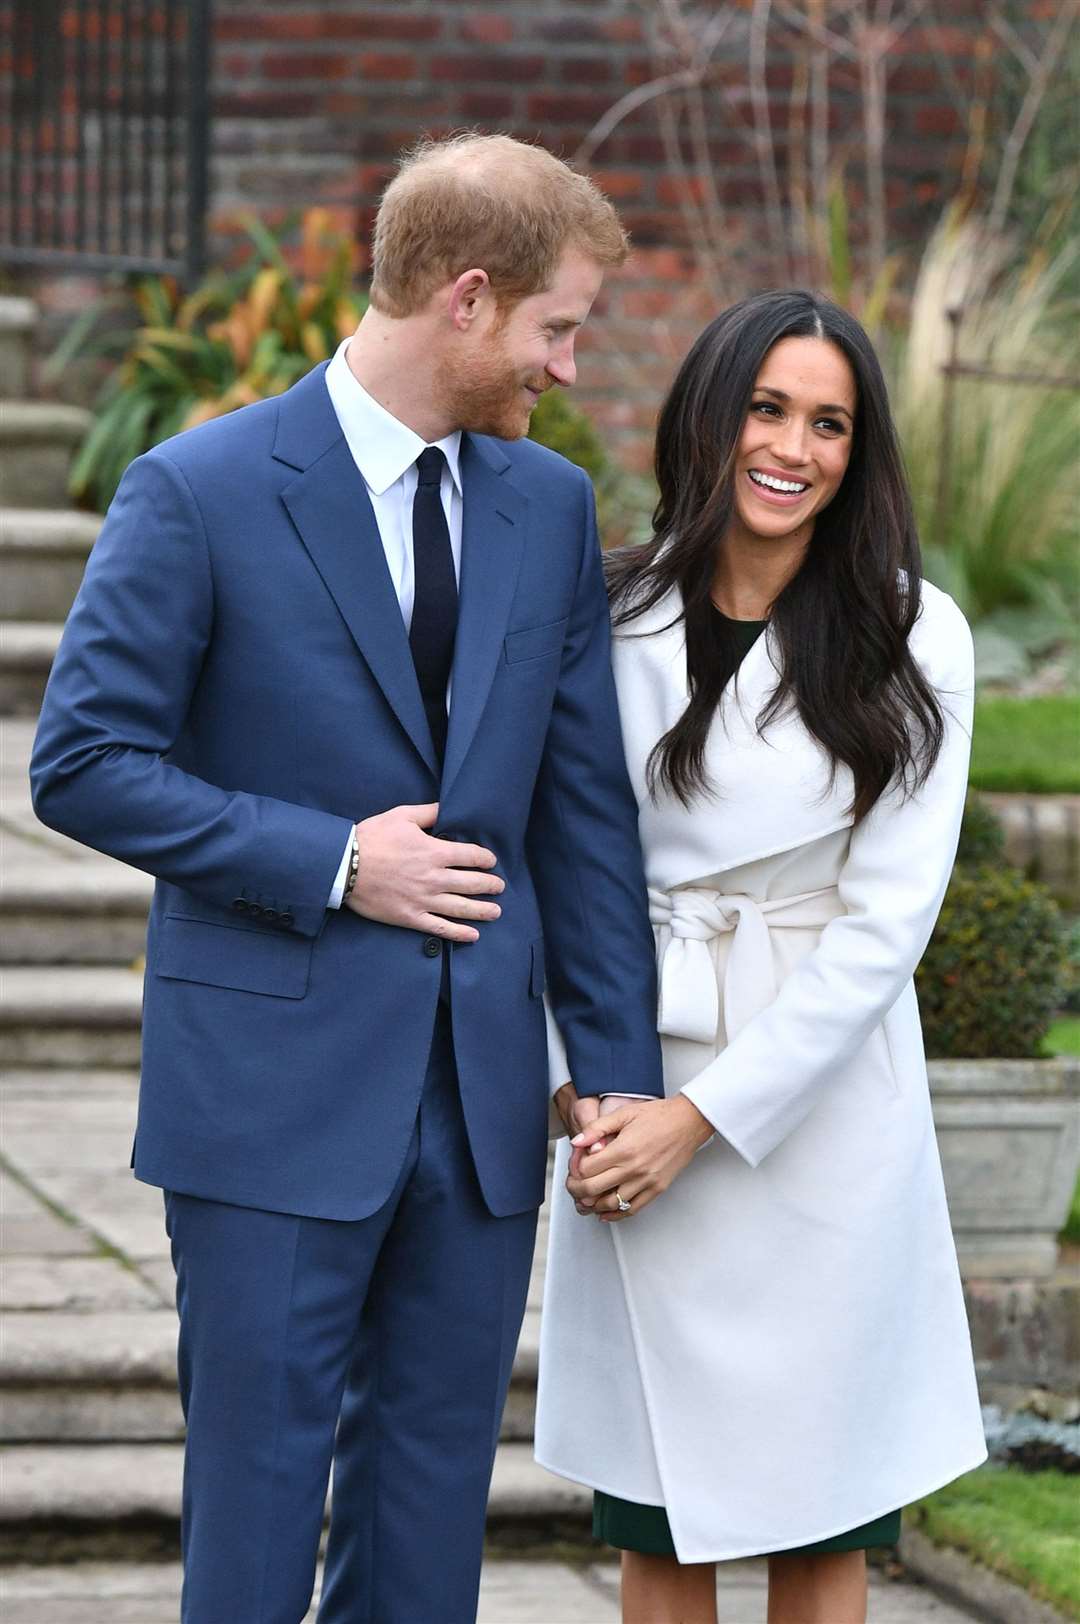 Harry and Meghan have complained about the actions of the press (Dominic Lipinski/PA)